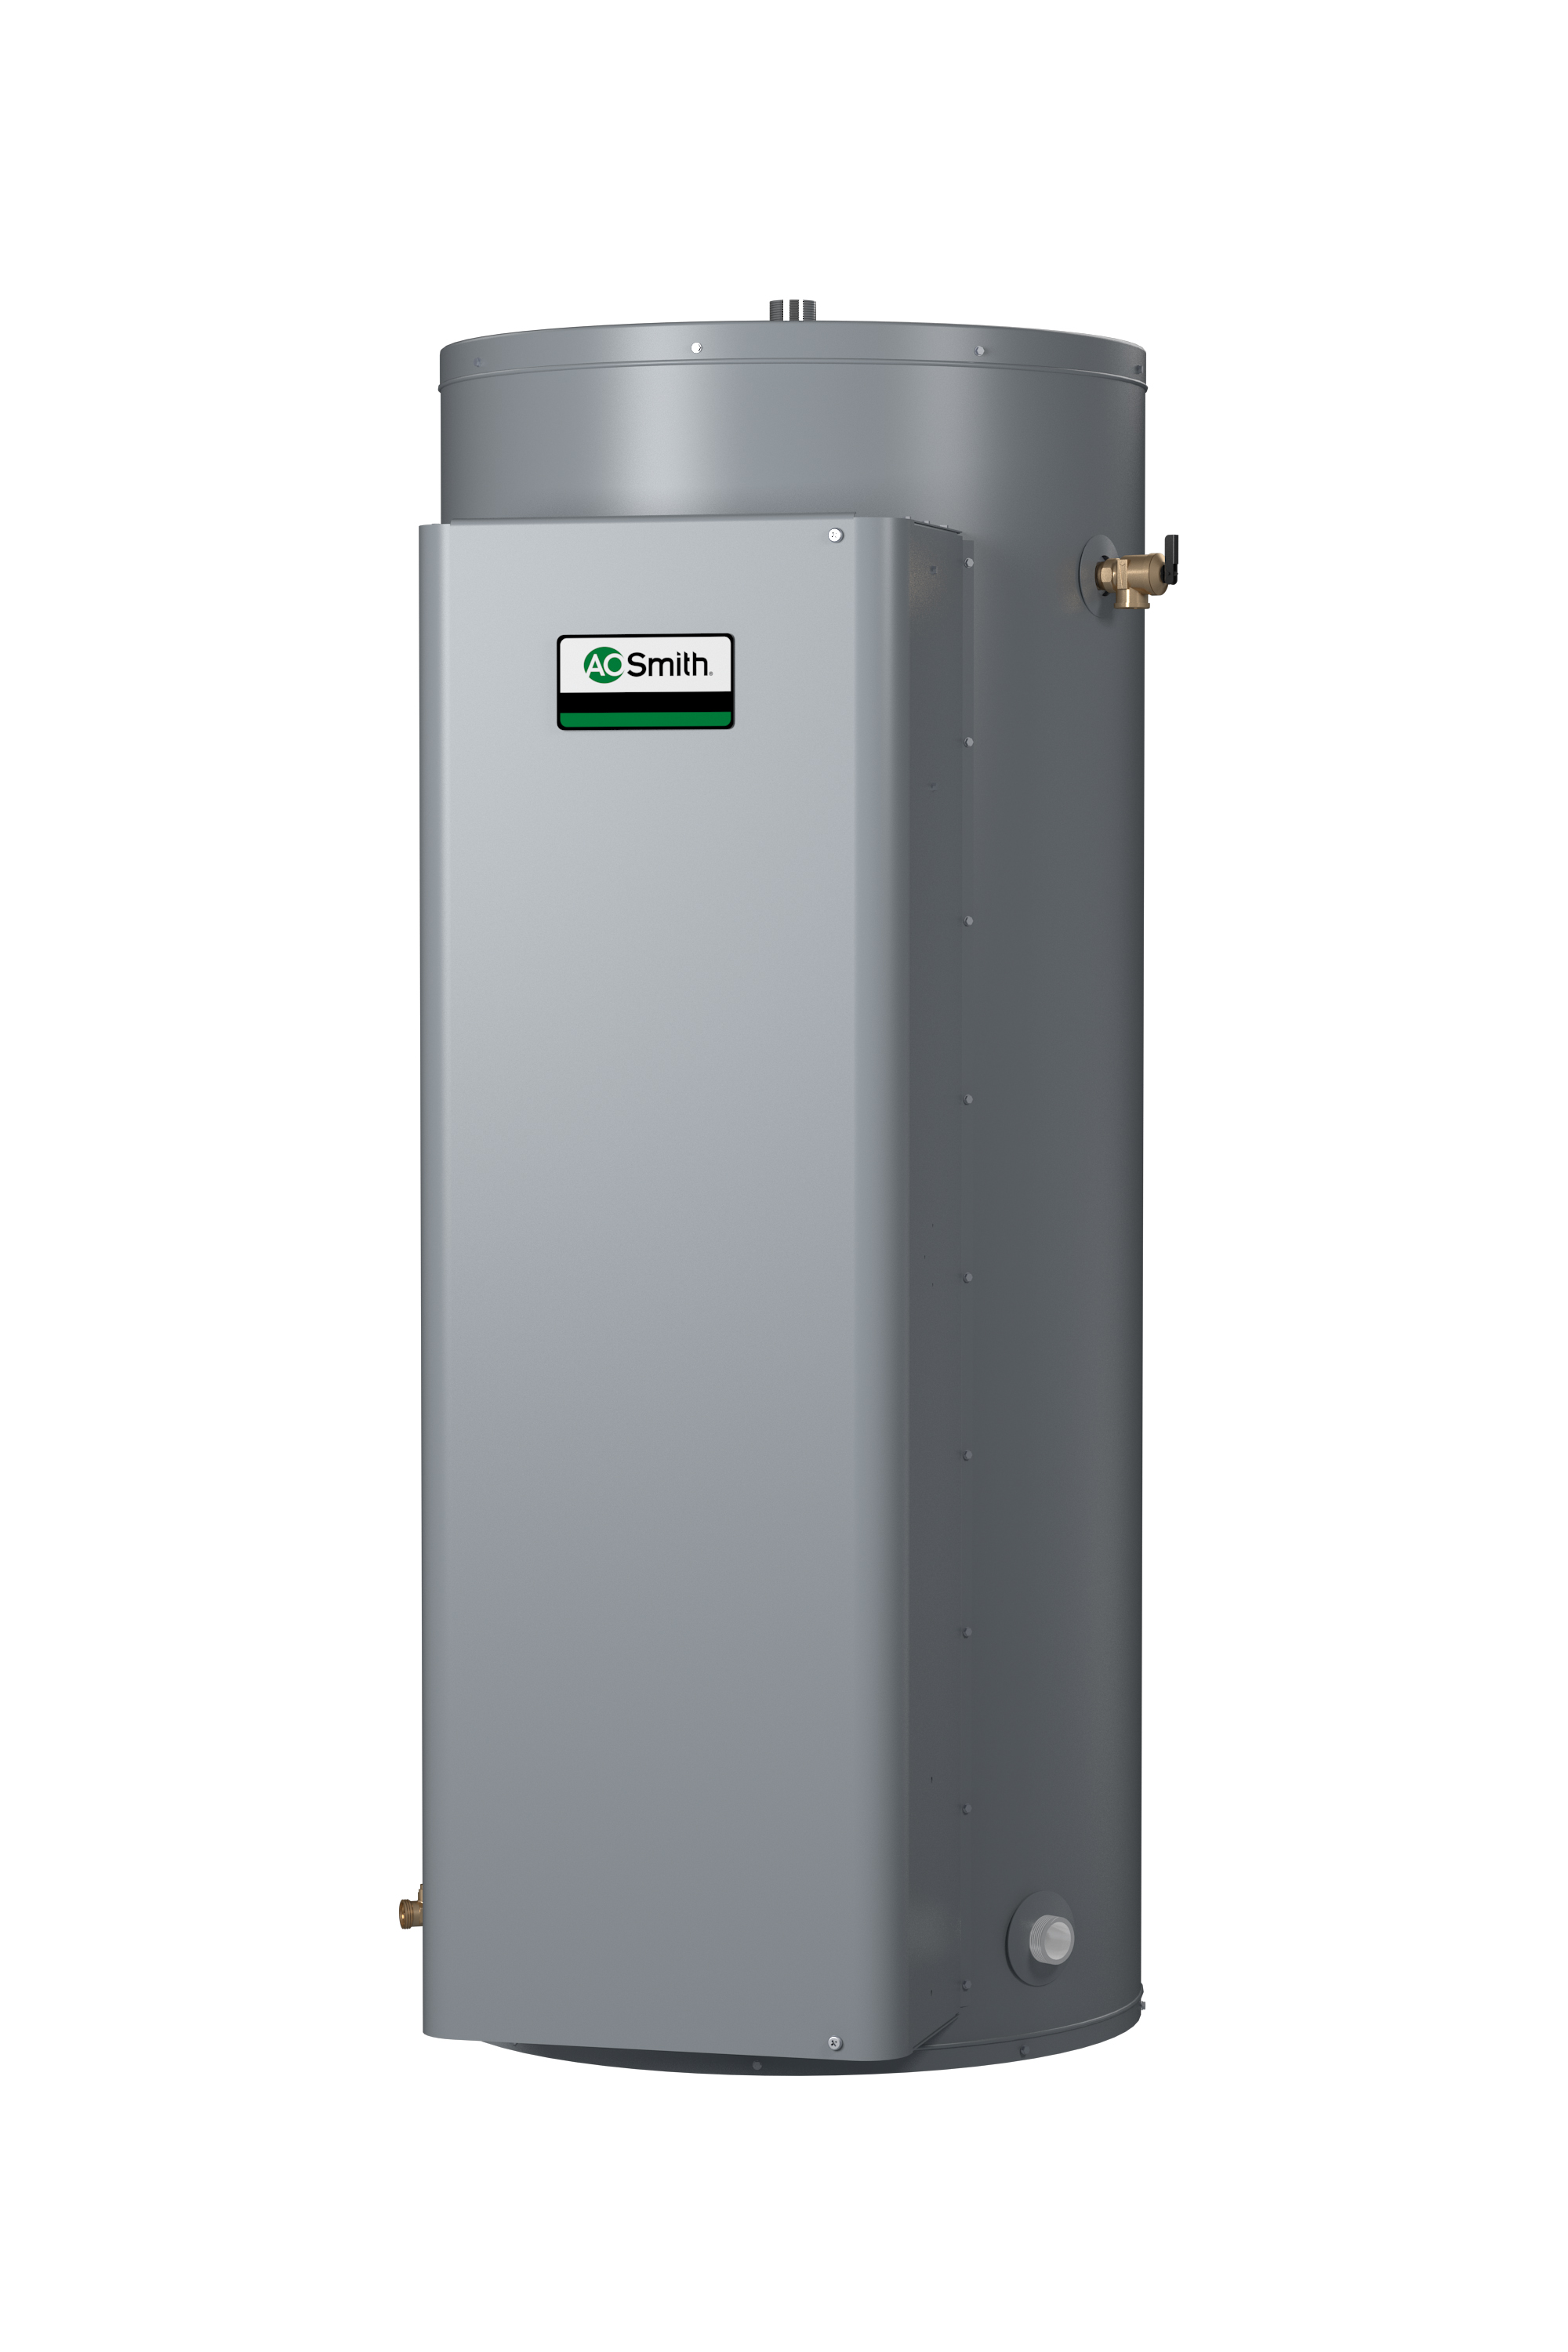 AO Smith DRE Water Heater Electric